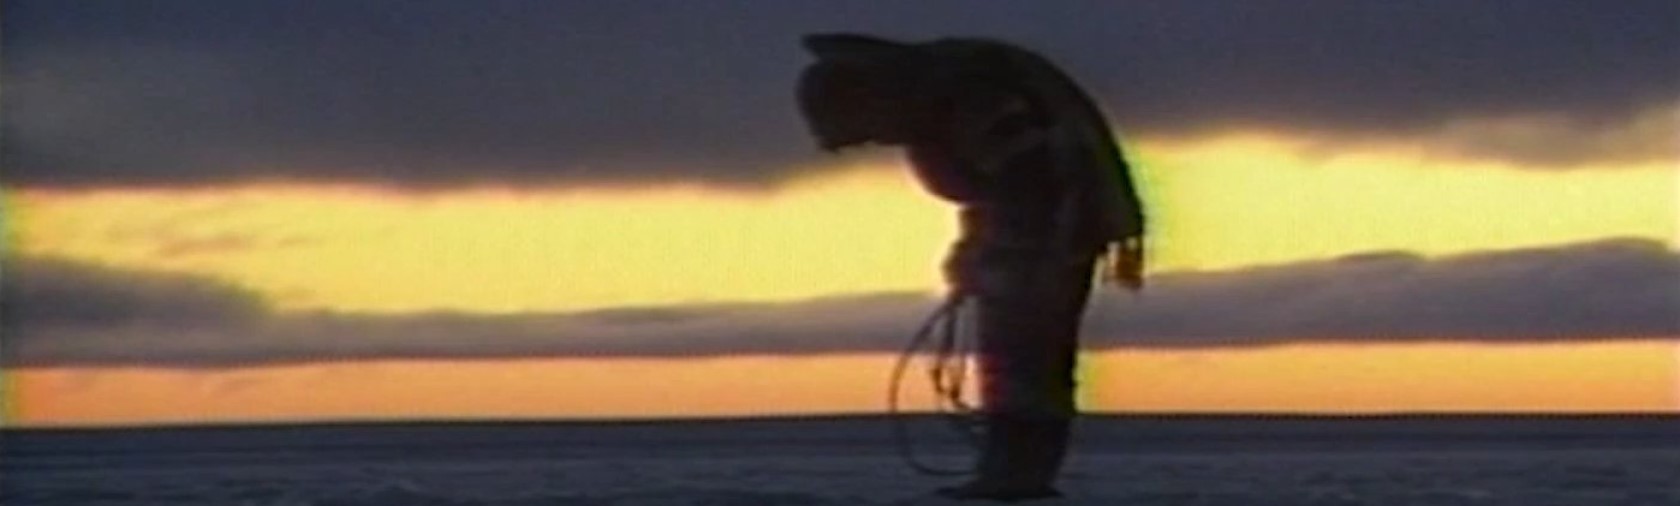 Silhouette of Inuit person at sunset